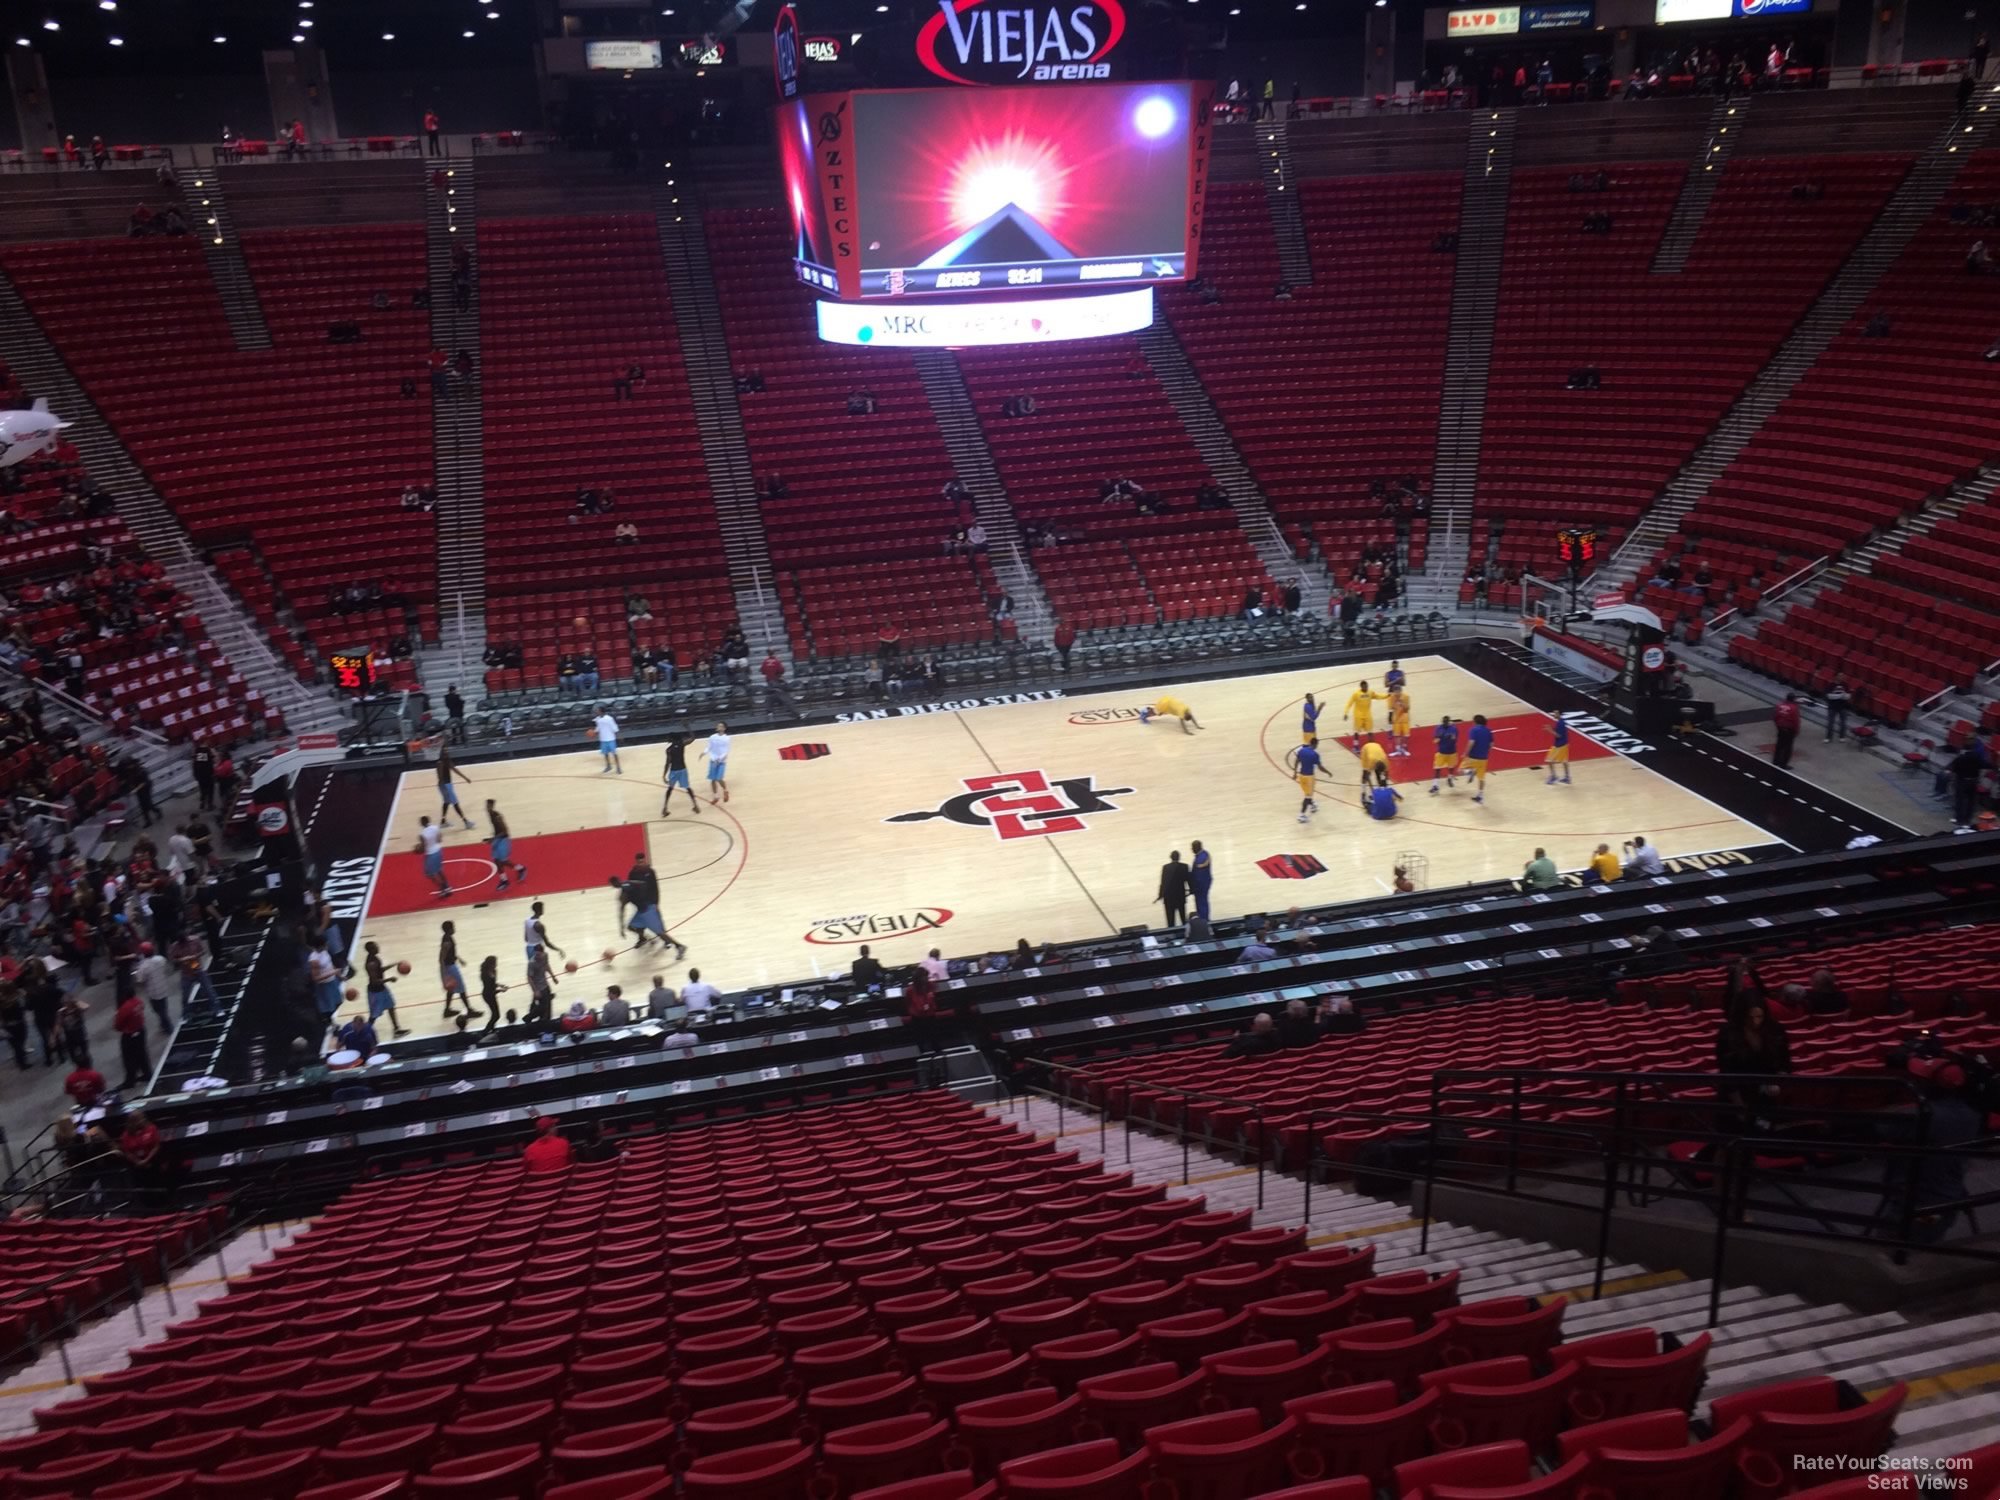 section q, row 30 seat view  - viejas arena